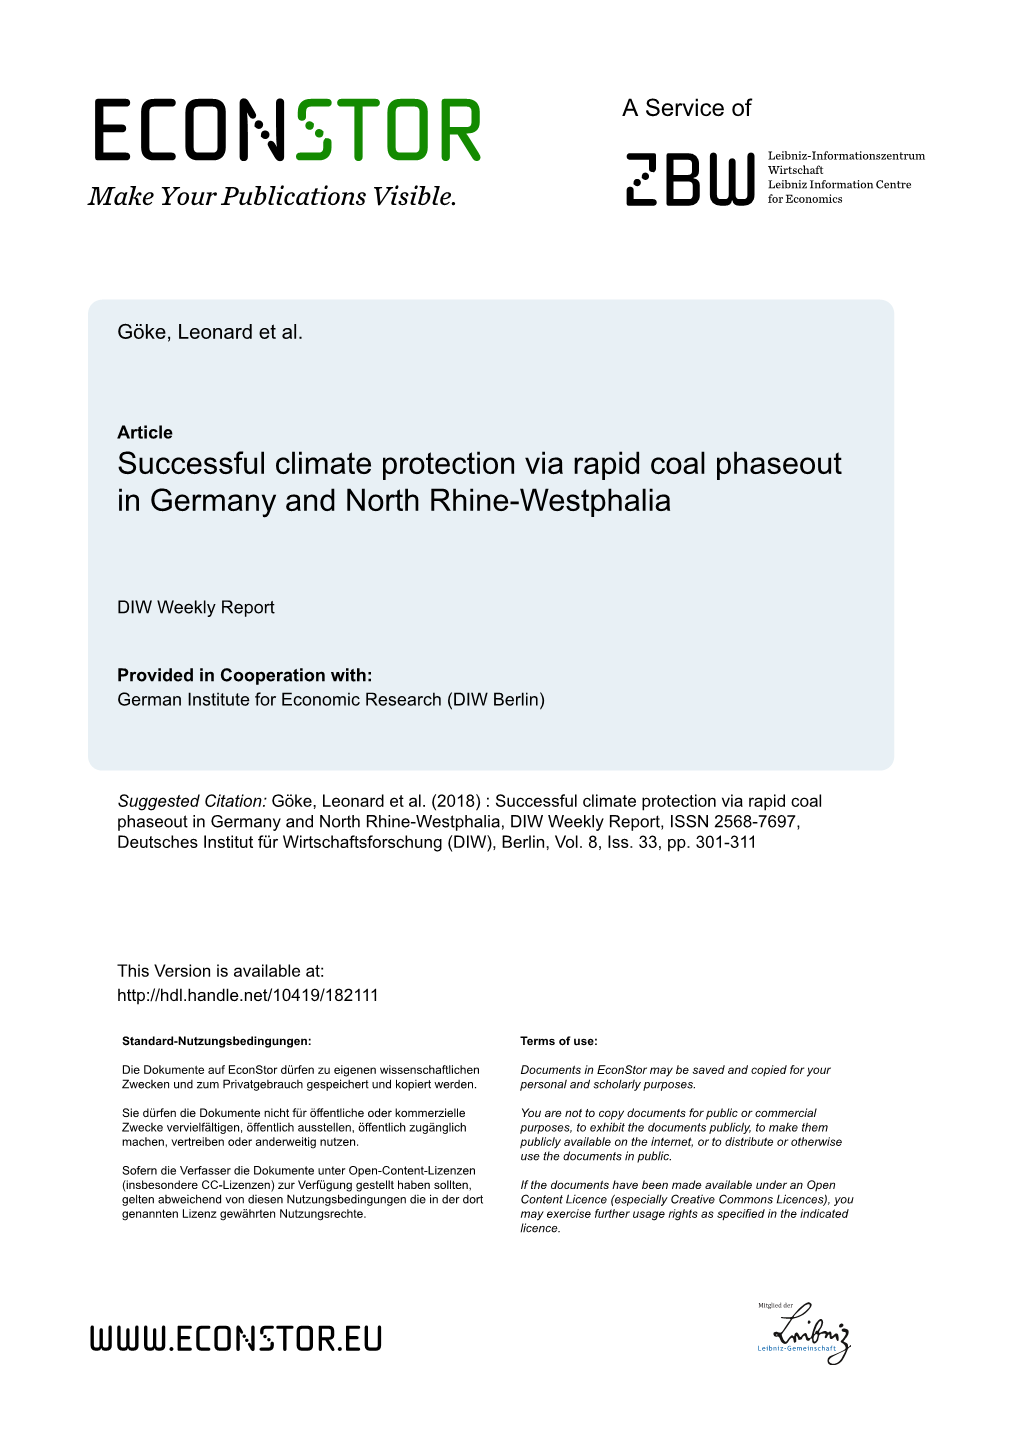 Successful Climate Protection Via Rapid Coal Phaseout in Germany and North Rhine-Westphalia